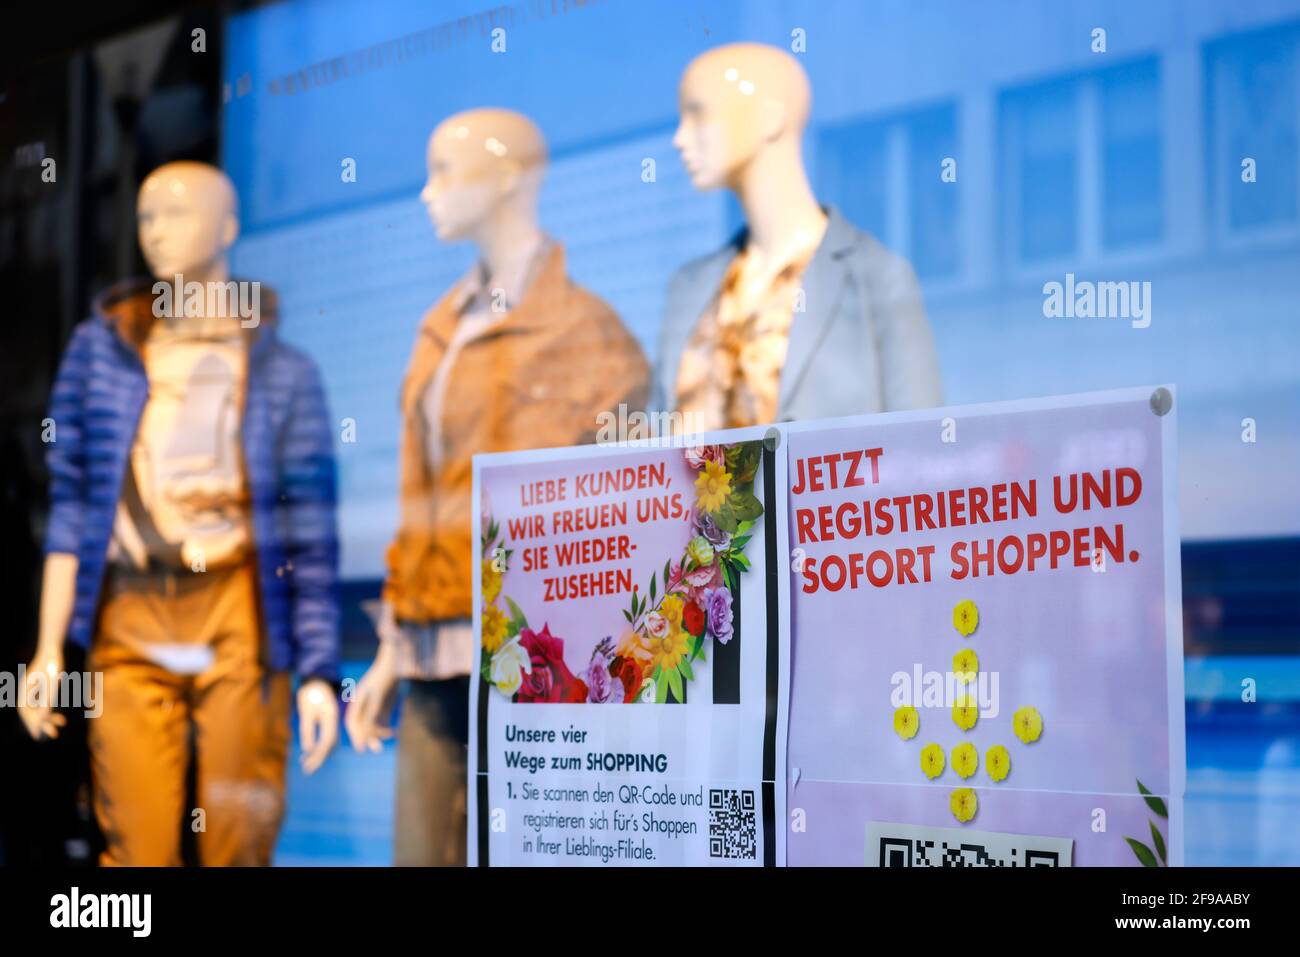 Düren, North Rhine-Westphalia, Germany - Düren city center in times of the corona crisis with the second lockdown, most shops are closed, Galeria Kaufhof Karstadt advertises in the Click & Meet shop window, register online and make a shopping appointment. Stock Photo